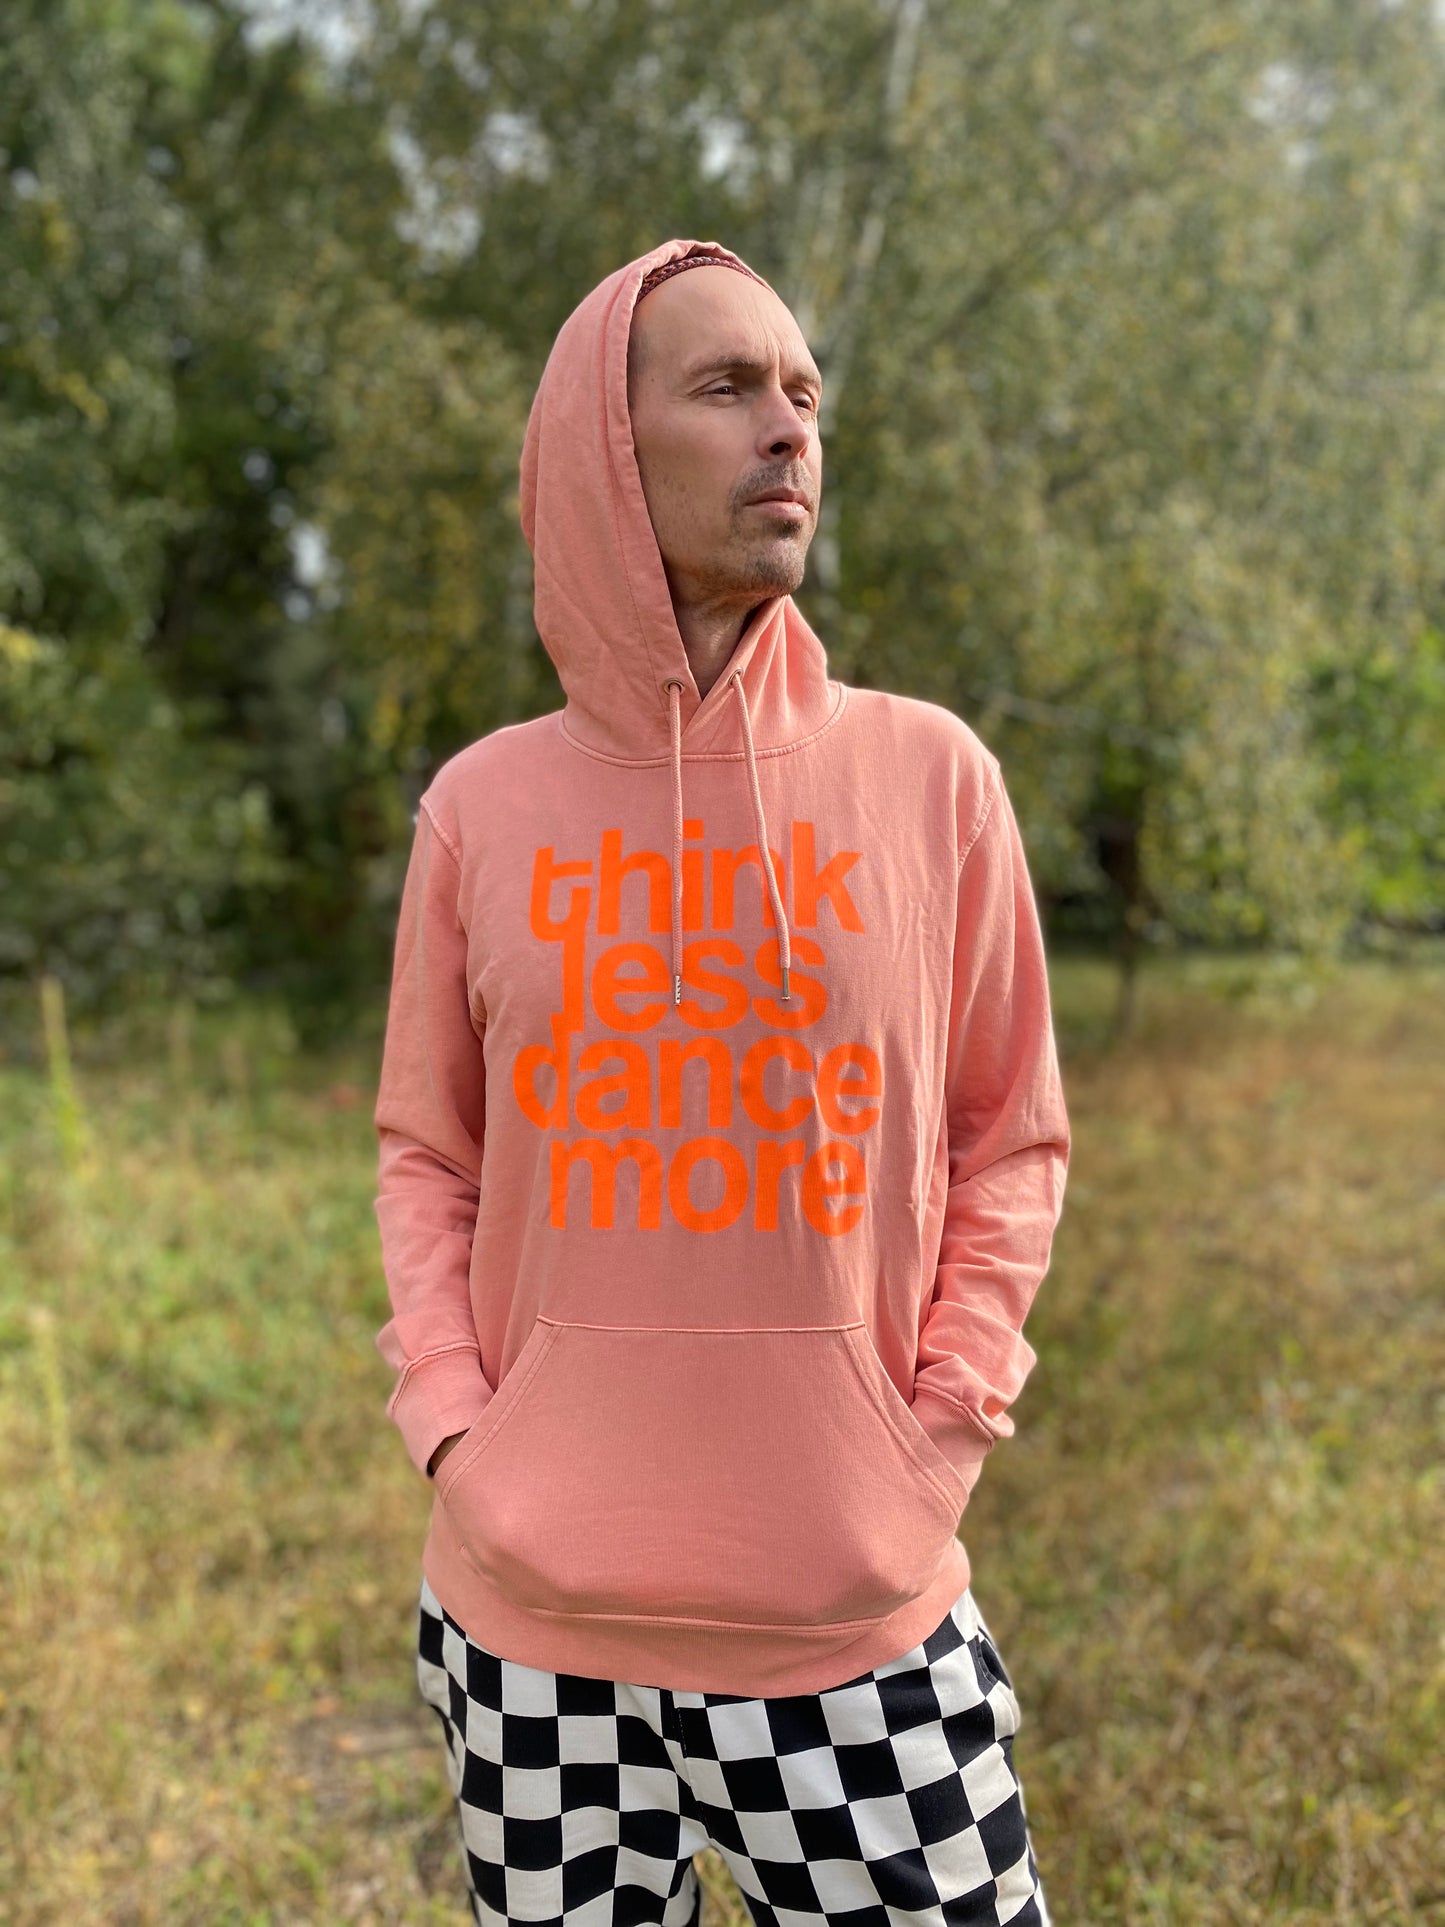 Dance More Candy Hoodie